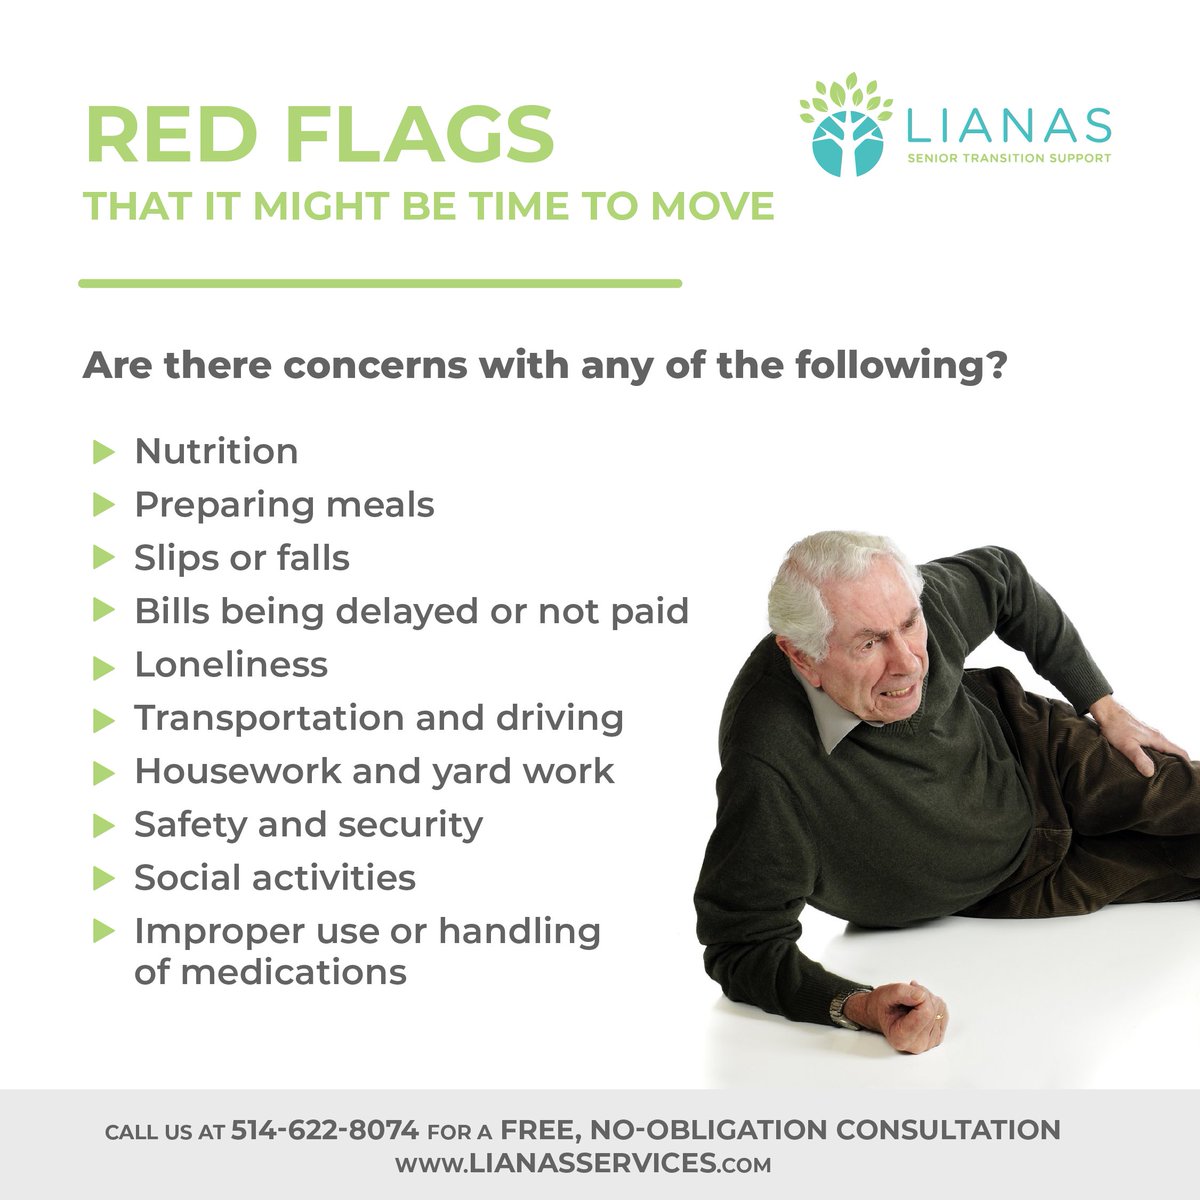 Signs that it might be time to move to a senior living community: Concerns with daily tasks or safety

#helpingmomsanddads #seniorsupport #seniorcare #eldercare #seniorliving